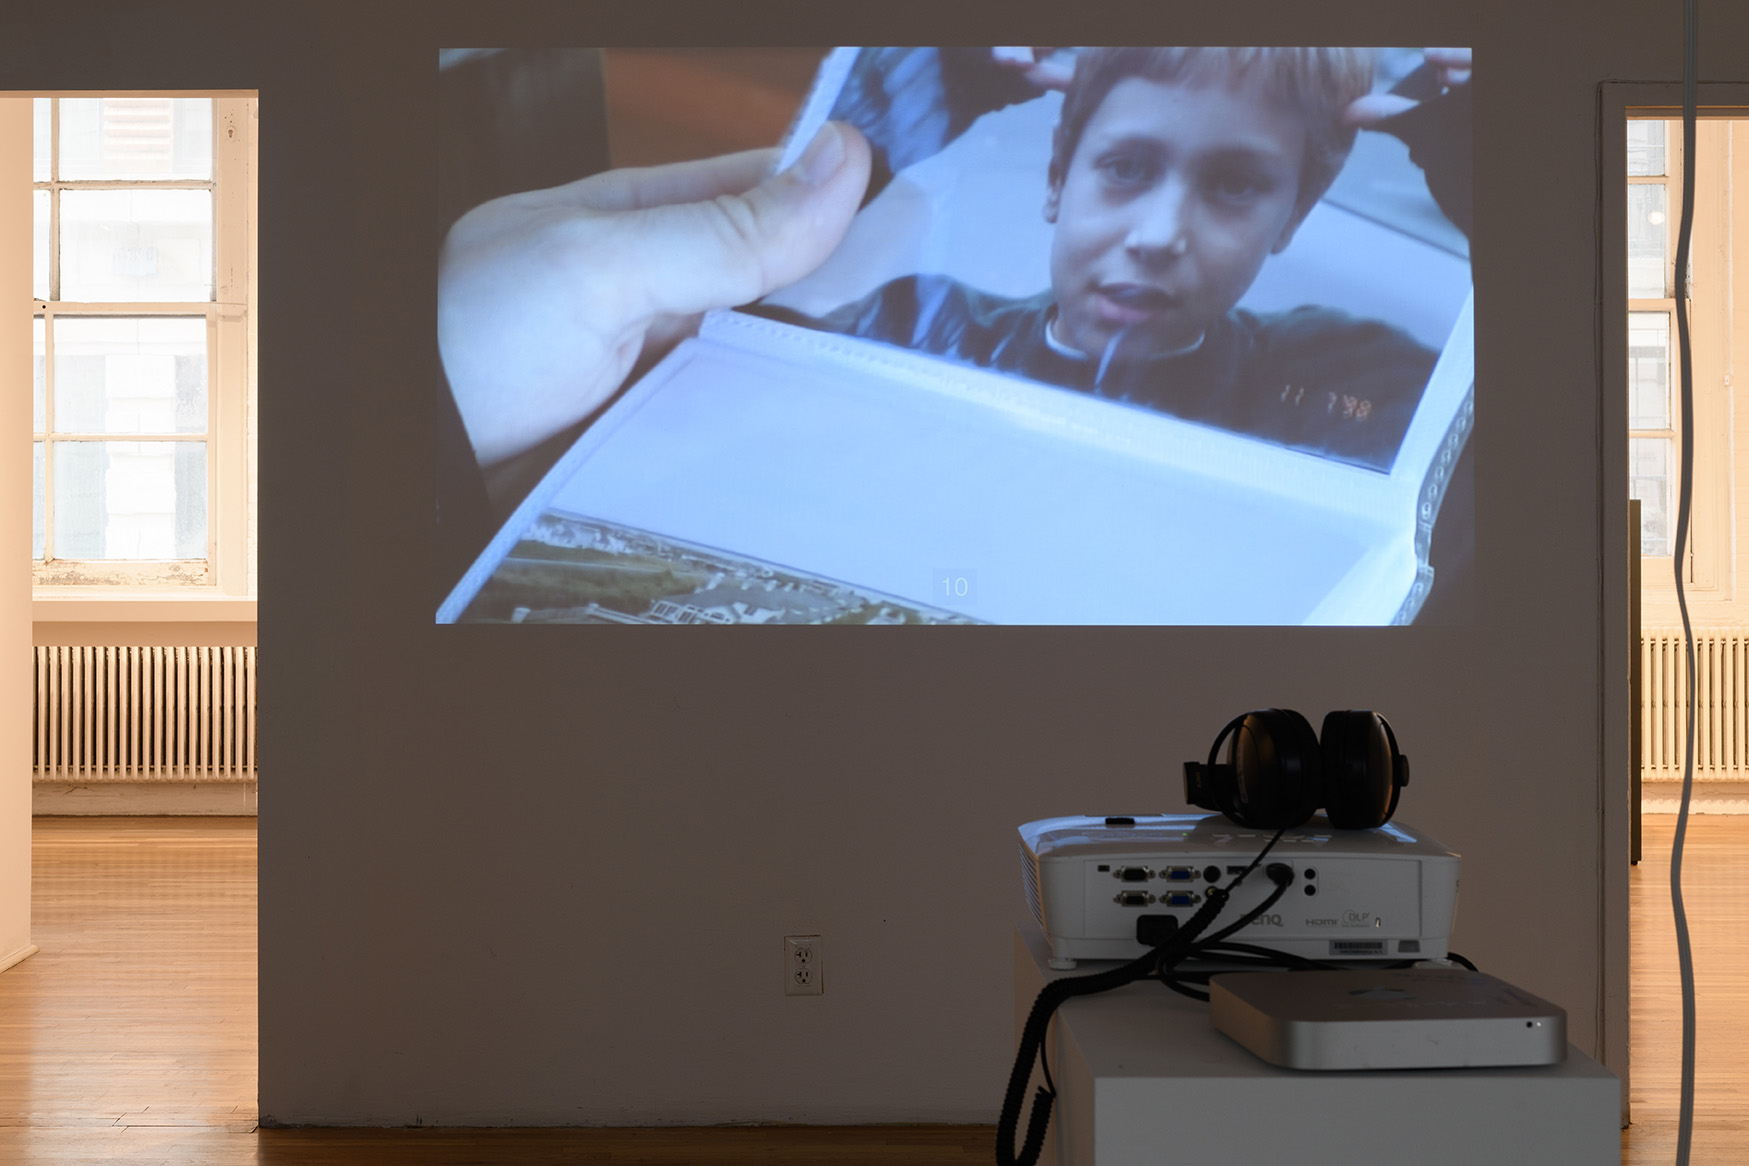 [A view of a color video projected at large-scale. The projected image, which shows a white hand holding a photo album open to a photo of a young person, who also appears to be white, wearing a blue sweater. On either side of the projected image are doorways leading to additional galleries.]